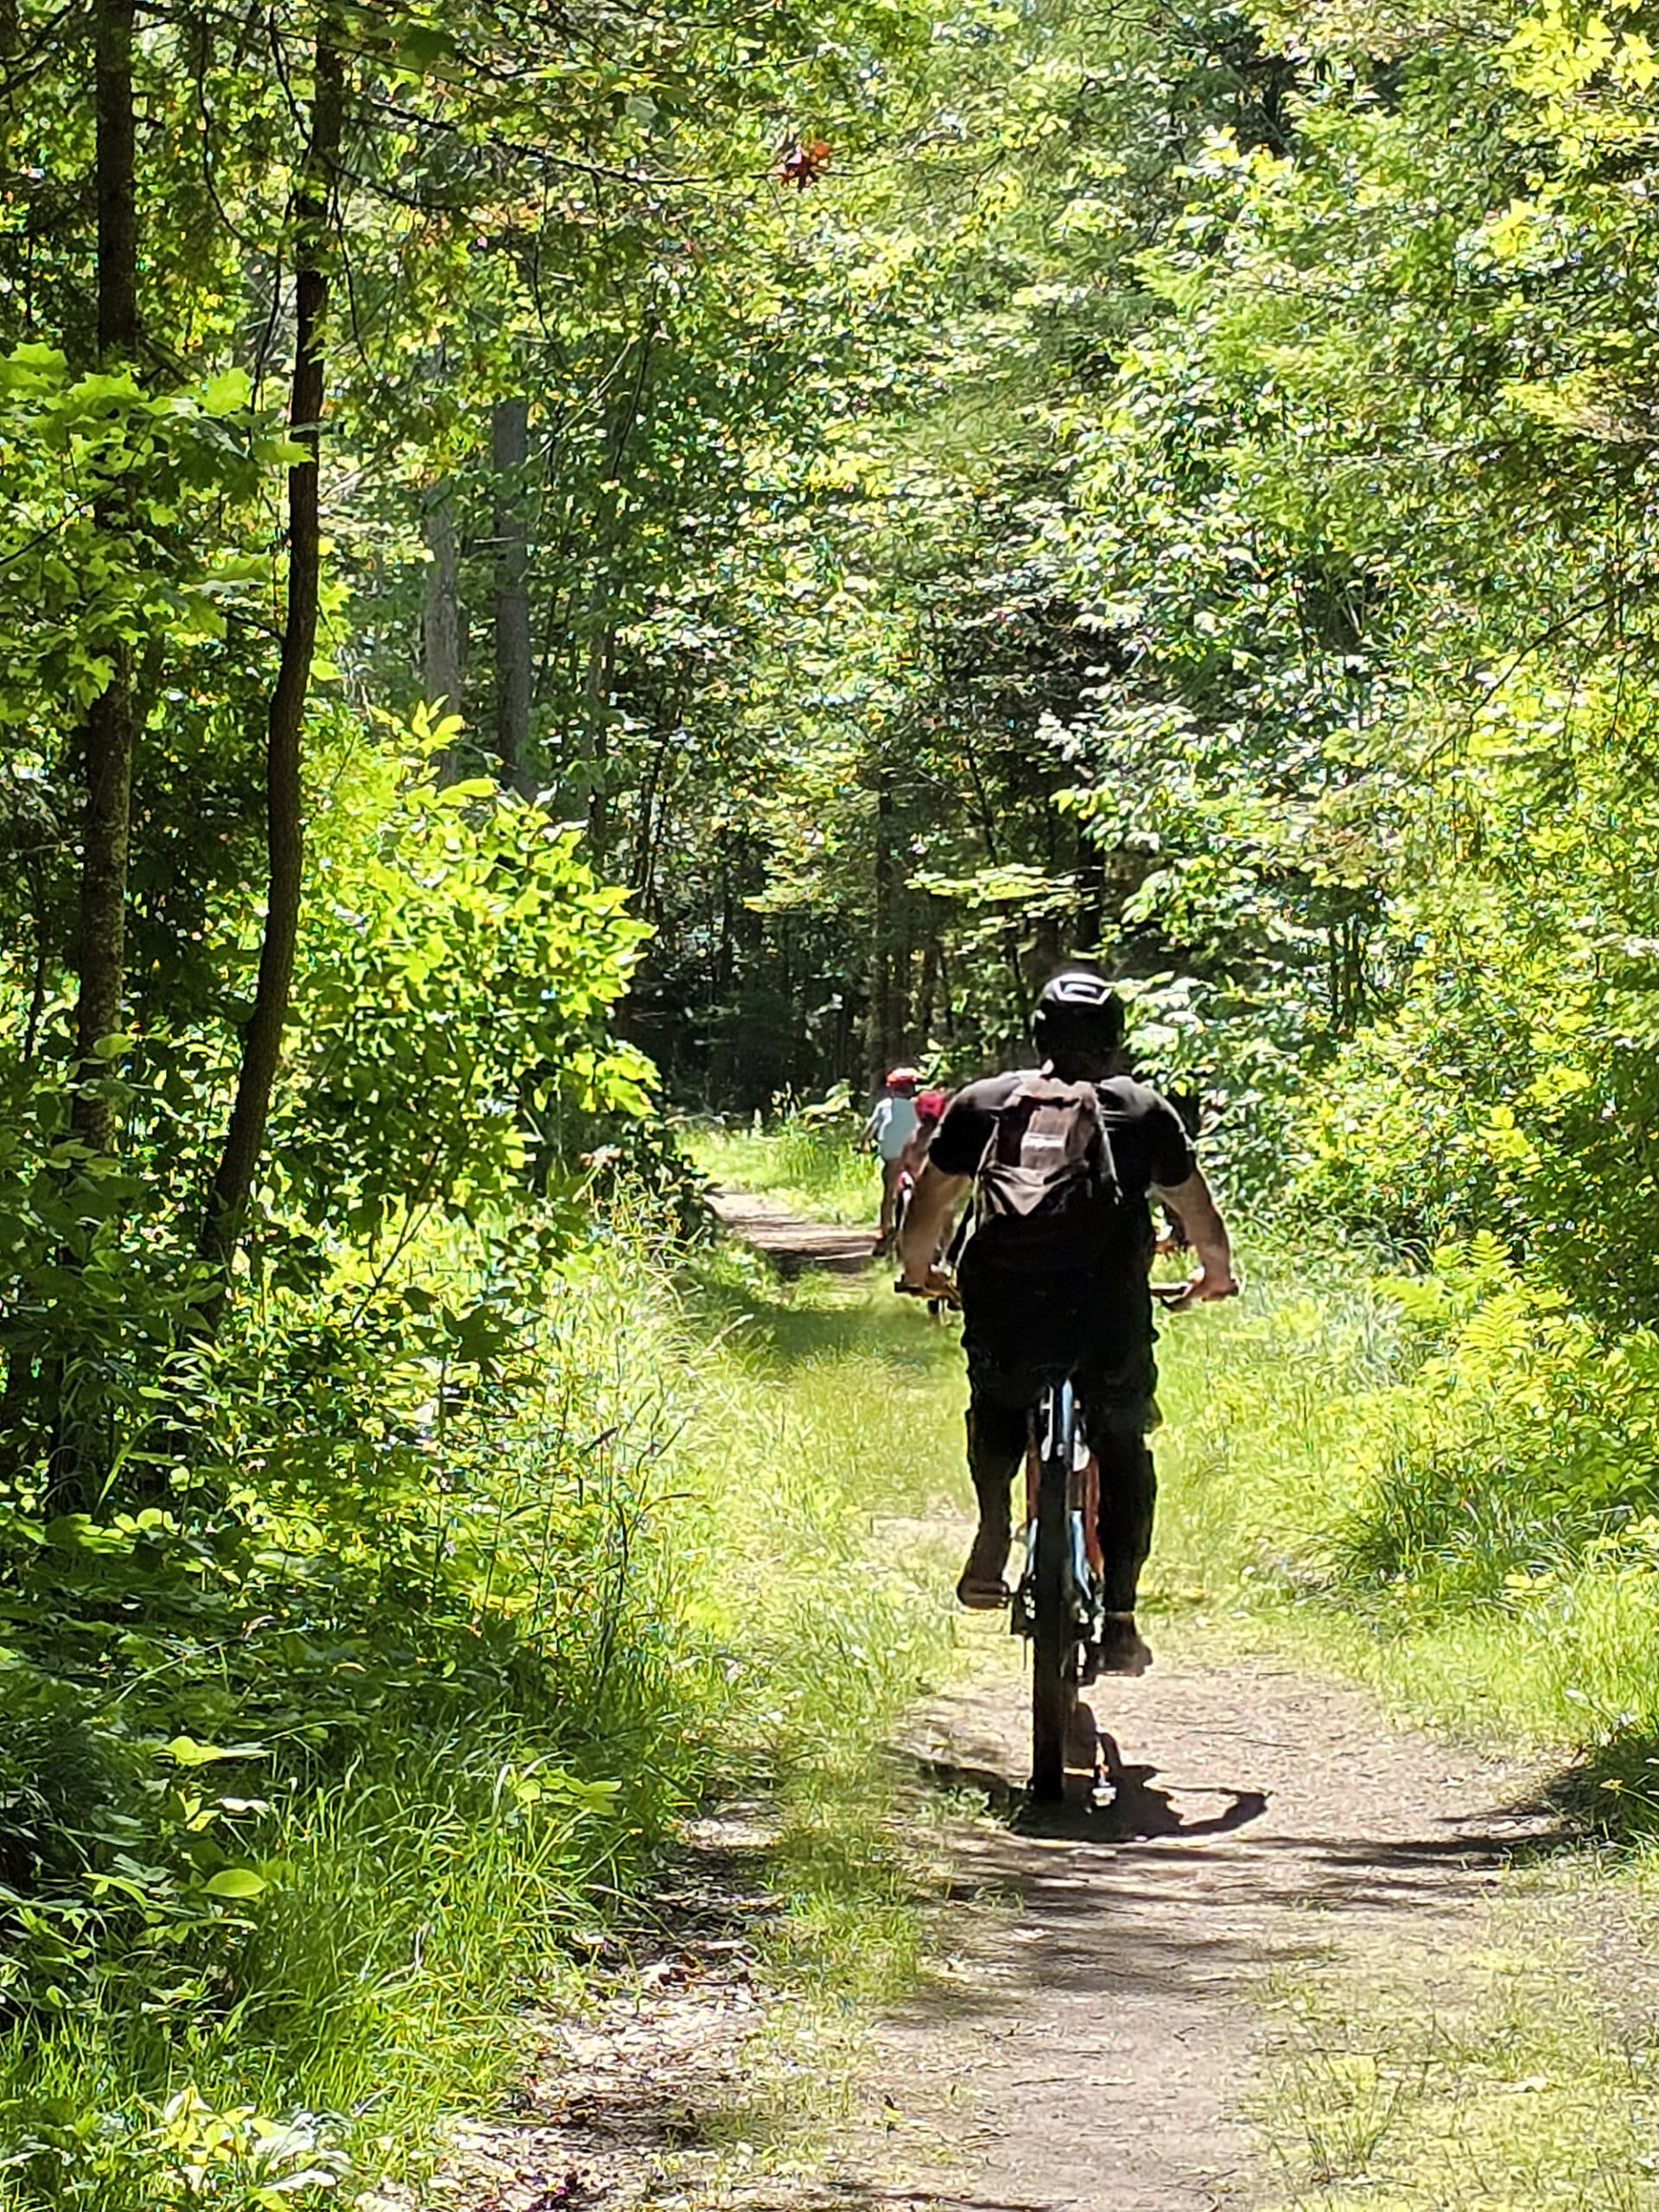 Several cyclists on the trails at Wasaga Beach Provincial Park.